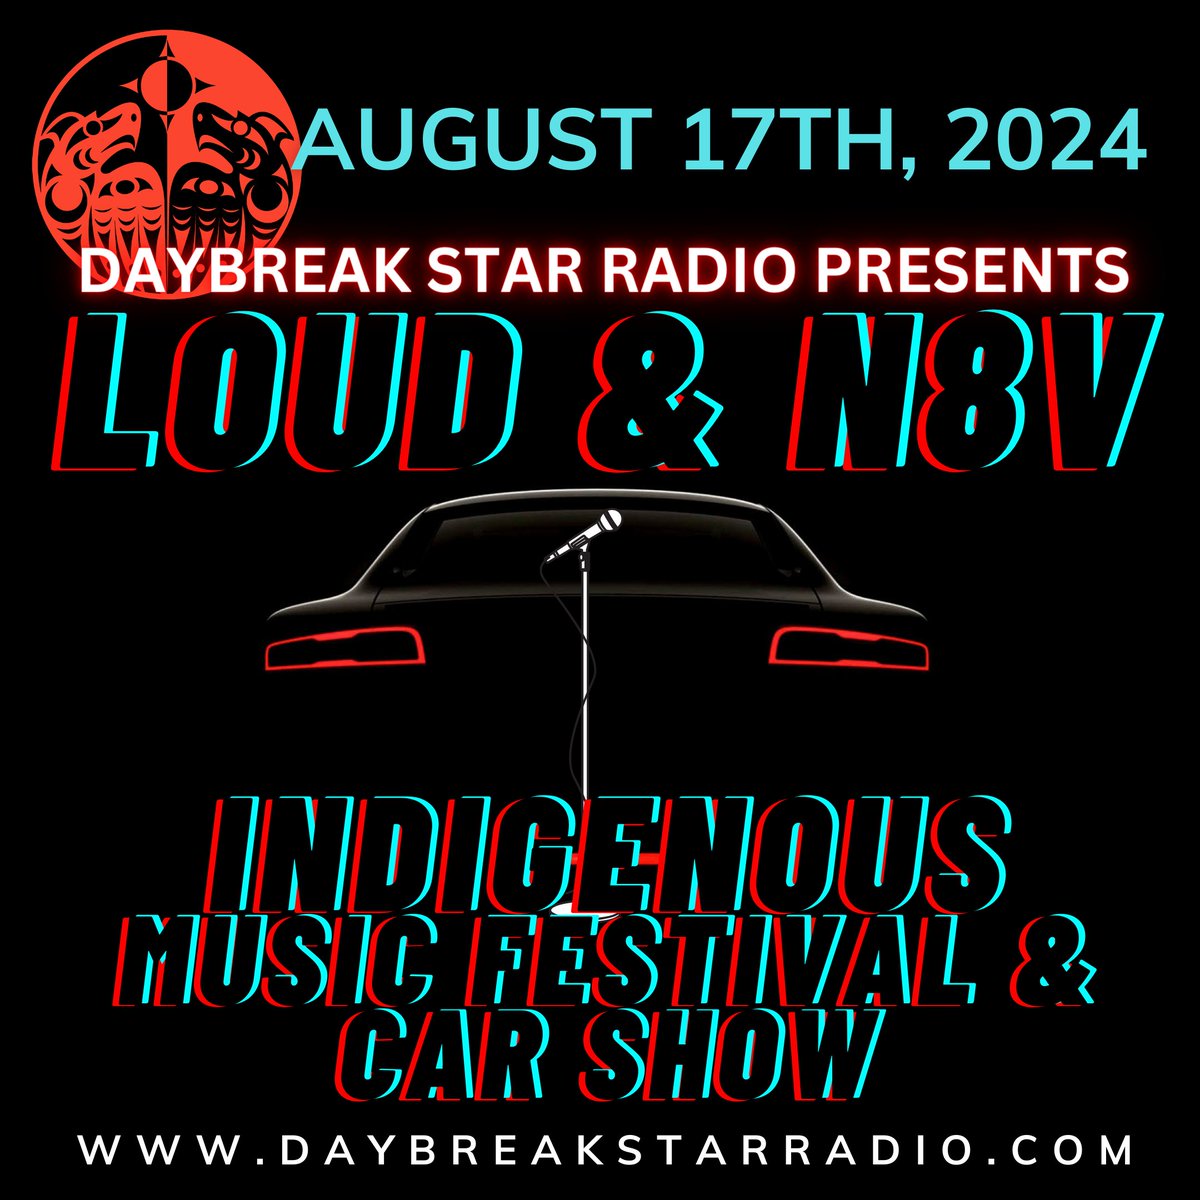 🌟 BIG NEWS! 🌟Mark your calendars for August 17th, 2024, and join us at the Daybreak Star Indian Cultural Center in Seattle for the Loud & N8V Indigenous Music Festival & Car Show! 🎶🚗
#LoudAndN8V #IndigenousMusic #CarShow #DaybreakStarRadio #SeattleEvents #GetYourTickets